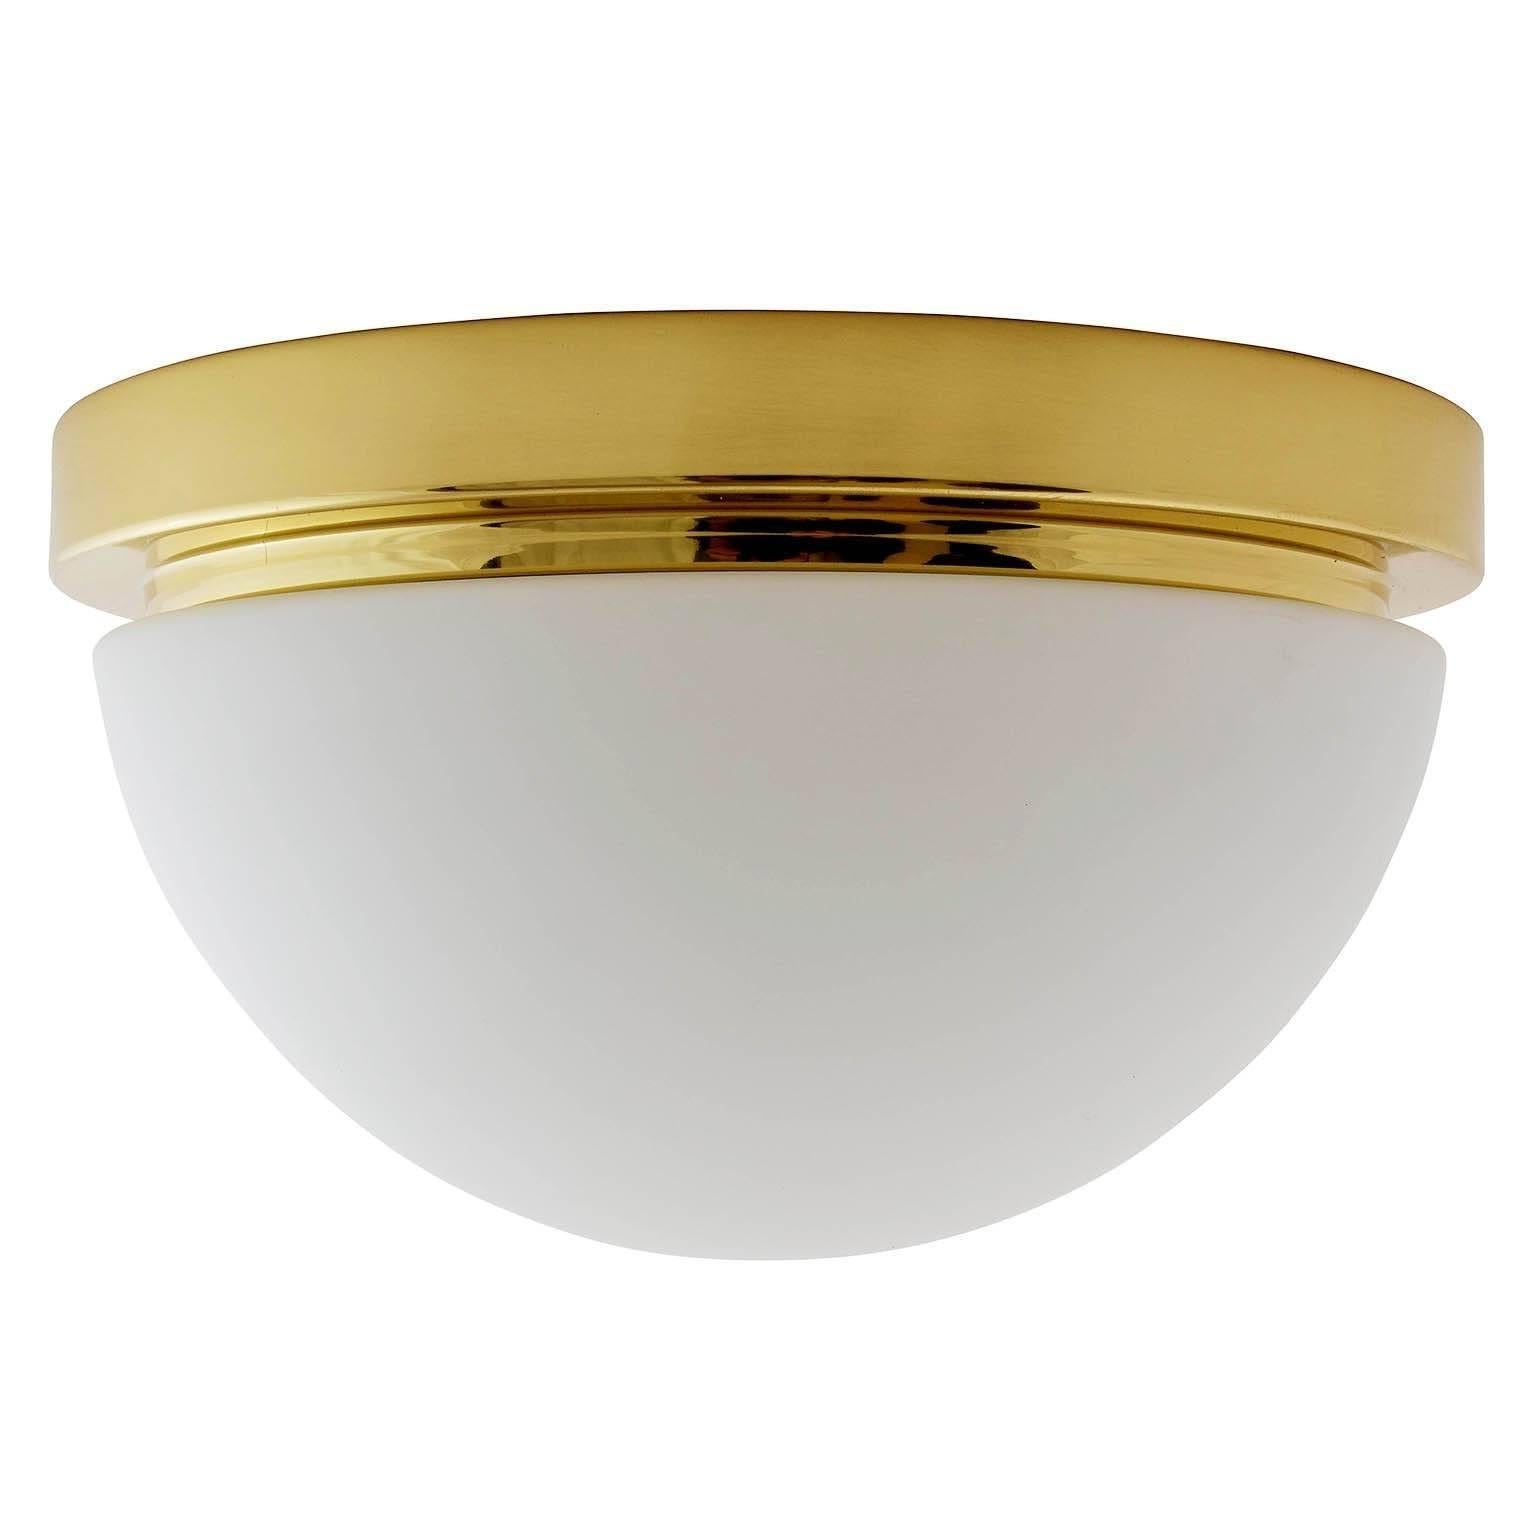 One of eight flush mount or wall lights by Glashütte Limburg, manufactured in midcentury, circa 1970.
They are made of a polished brass armature with a dome shaped opal glass lampshade. Labelled with Glashütte Limburg.
The price is per light. They